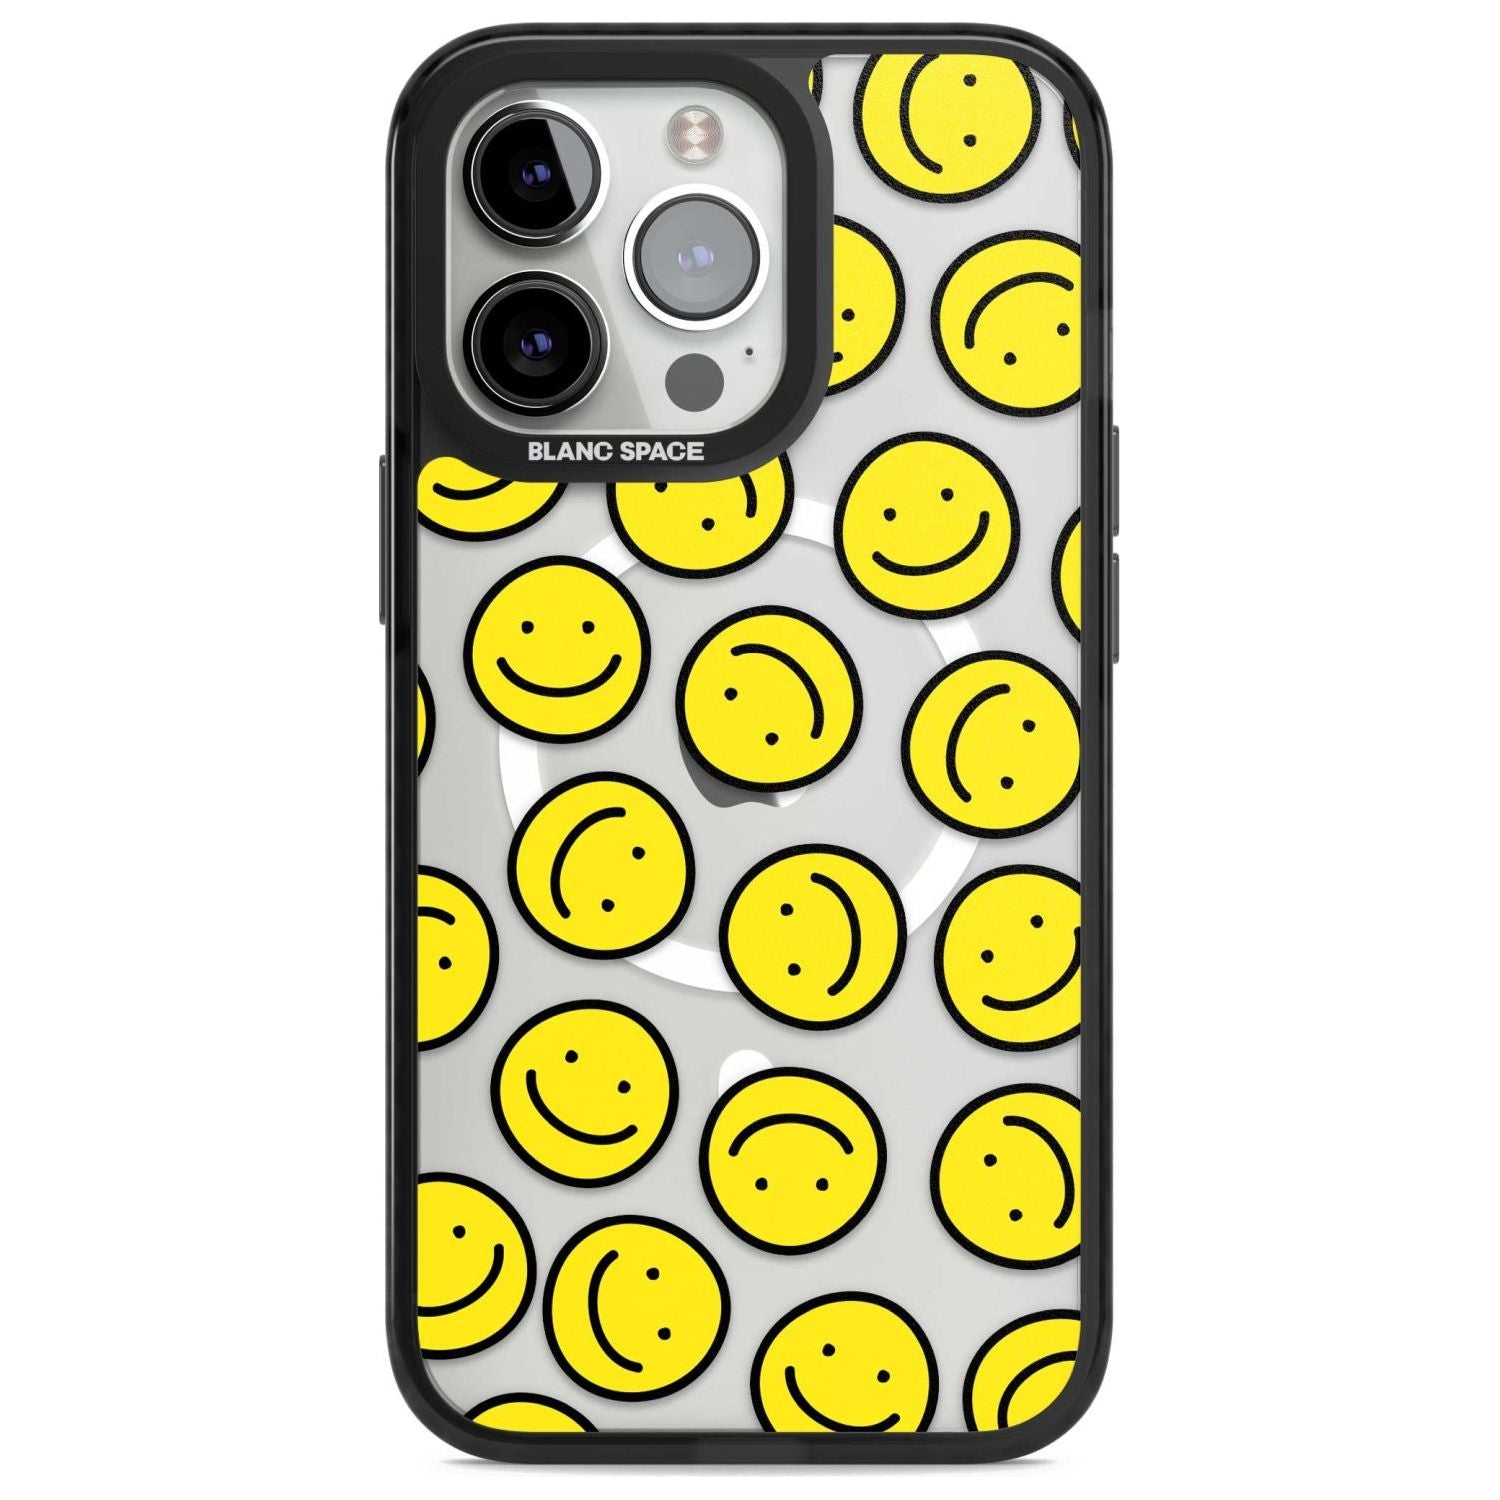 Happy Face Clear Pattern Phone Case iPhone 15 Pro Max / Magsafe Black Impact Case,iPhone 15 Pro / Magsafe Black Impact Case,iPhone 14 Pro Max / Magsafe Black Impact Case,iPhone 14 Pro / Magsafe Black Impact Case,iPhone 13 Pro / Magsafe Black Impact Case Blanc Space